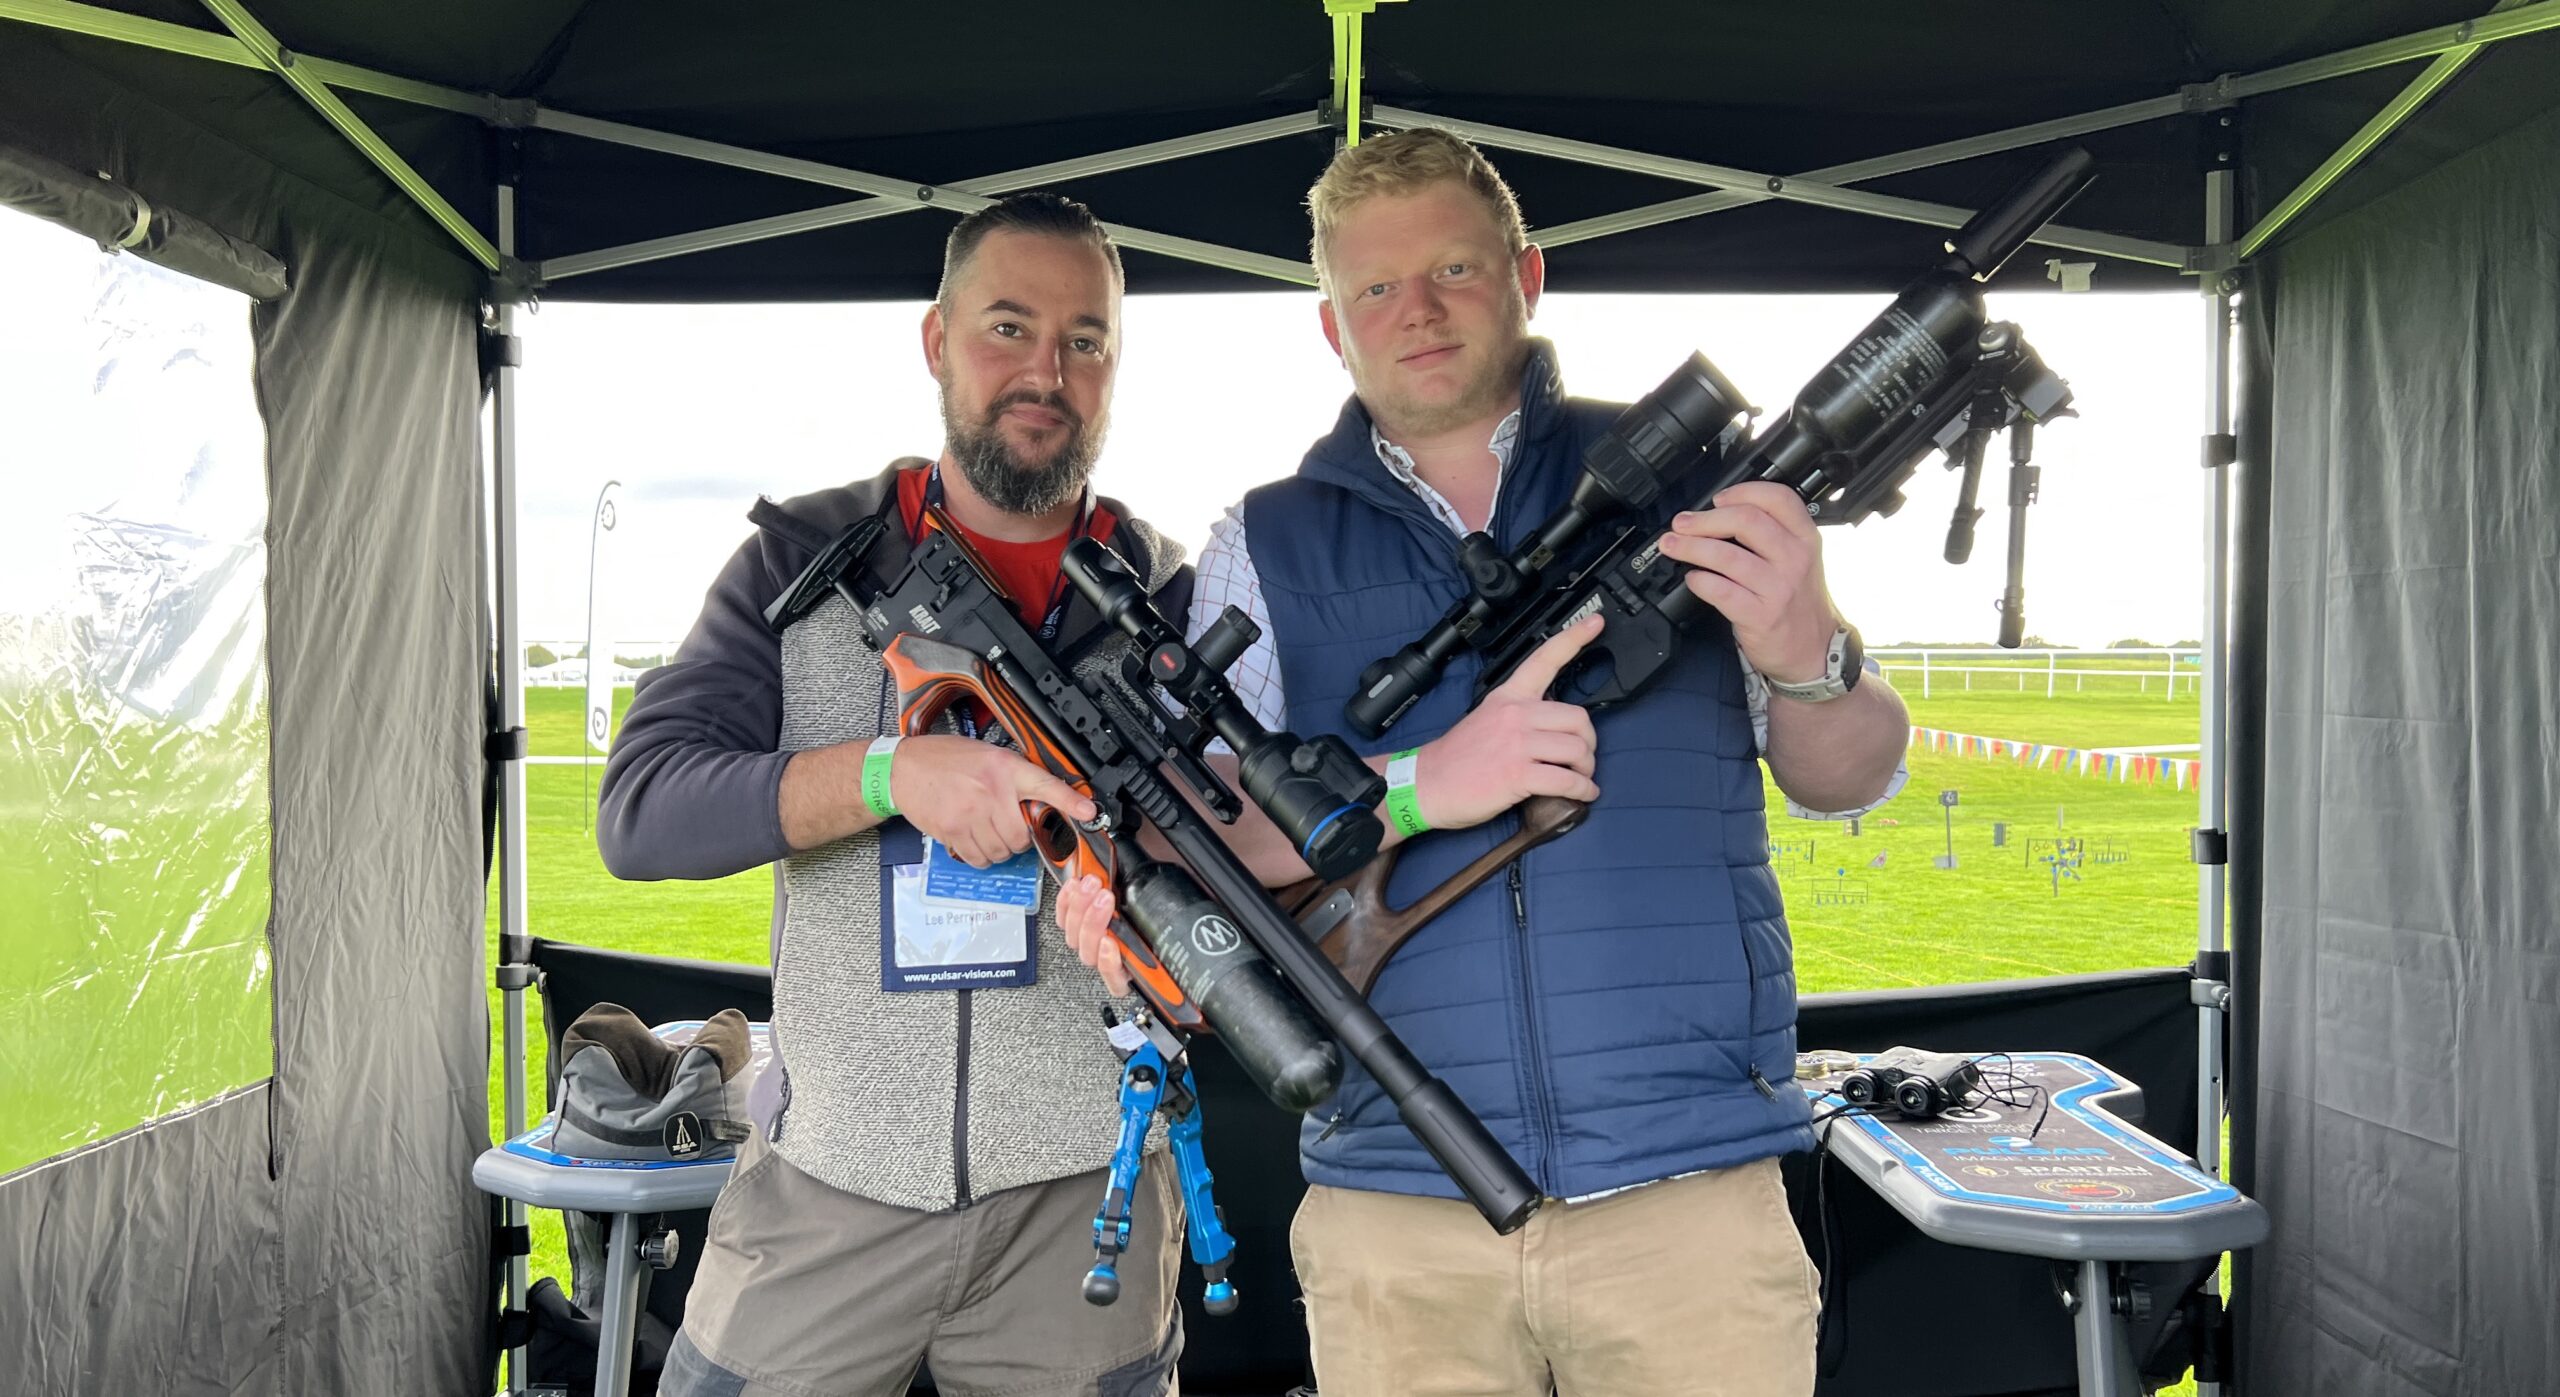 Lee Perryman with UK distributor Thomas Jacks testing Pulsar Thermion DUO in the Yorkshire Shooting Show